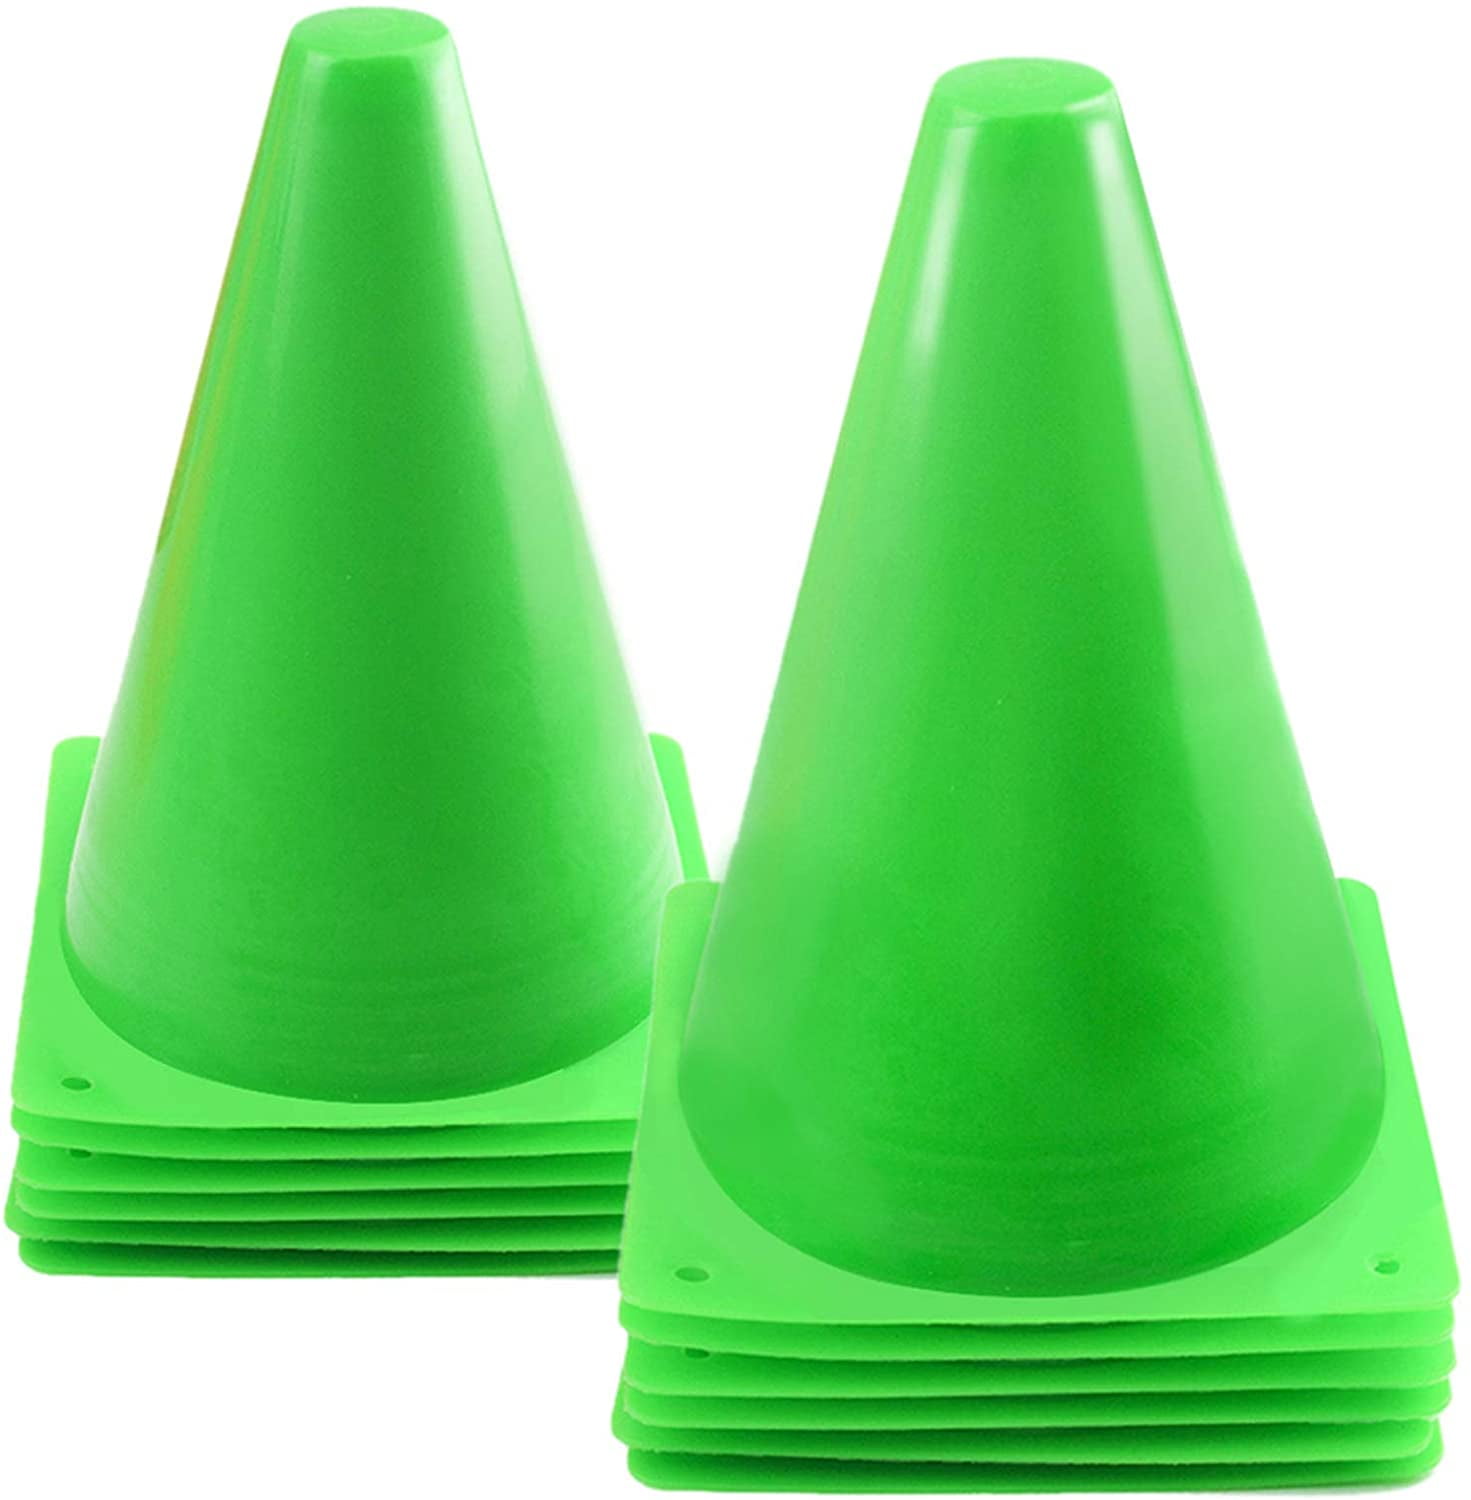 Fitness Running Agility Safety Training Boundry Marking Cones Set Of 50 Assorted 